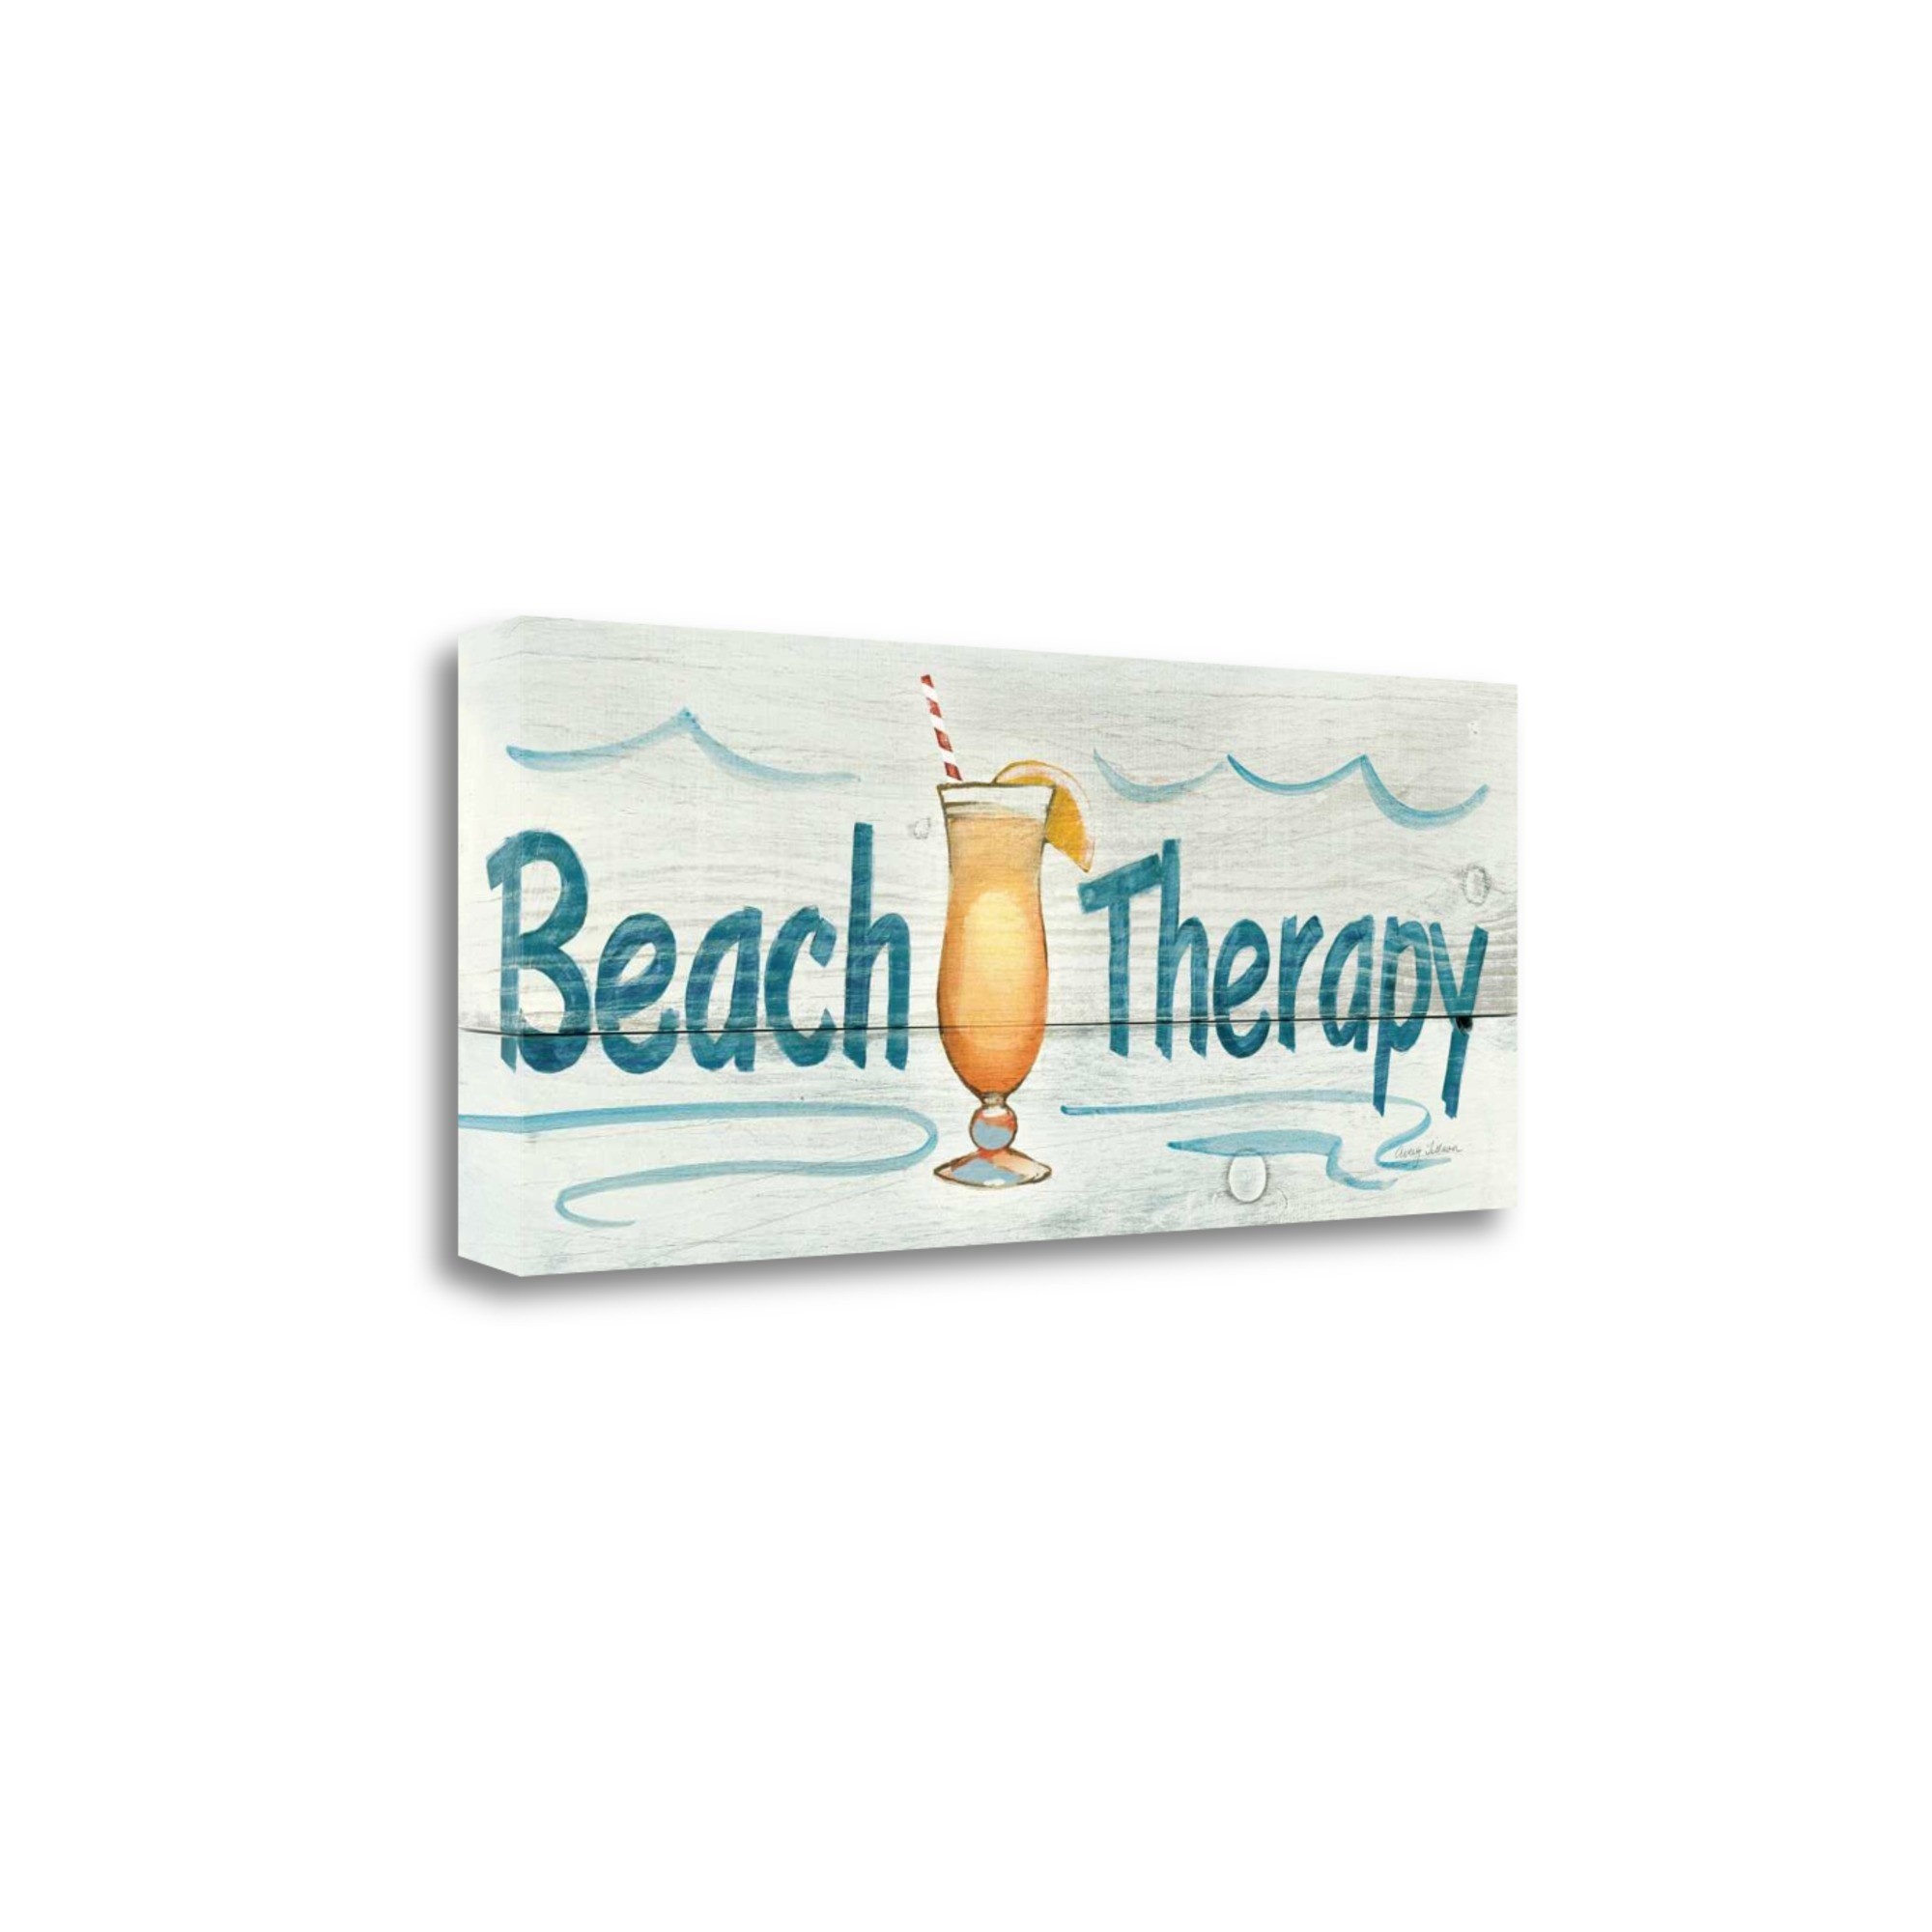 "Beach Therapy - In Color" By Avery Tillmon, Giclee Print on Gallery Wrap Canvas